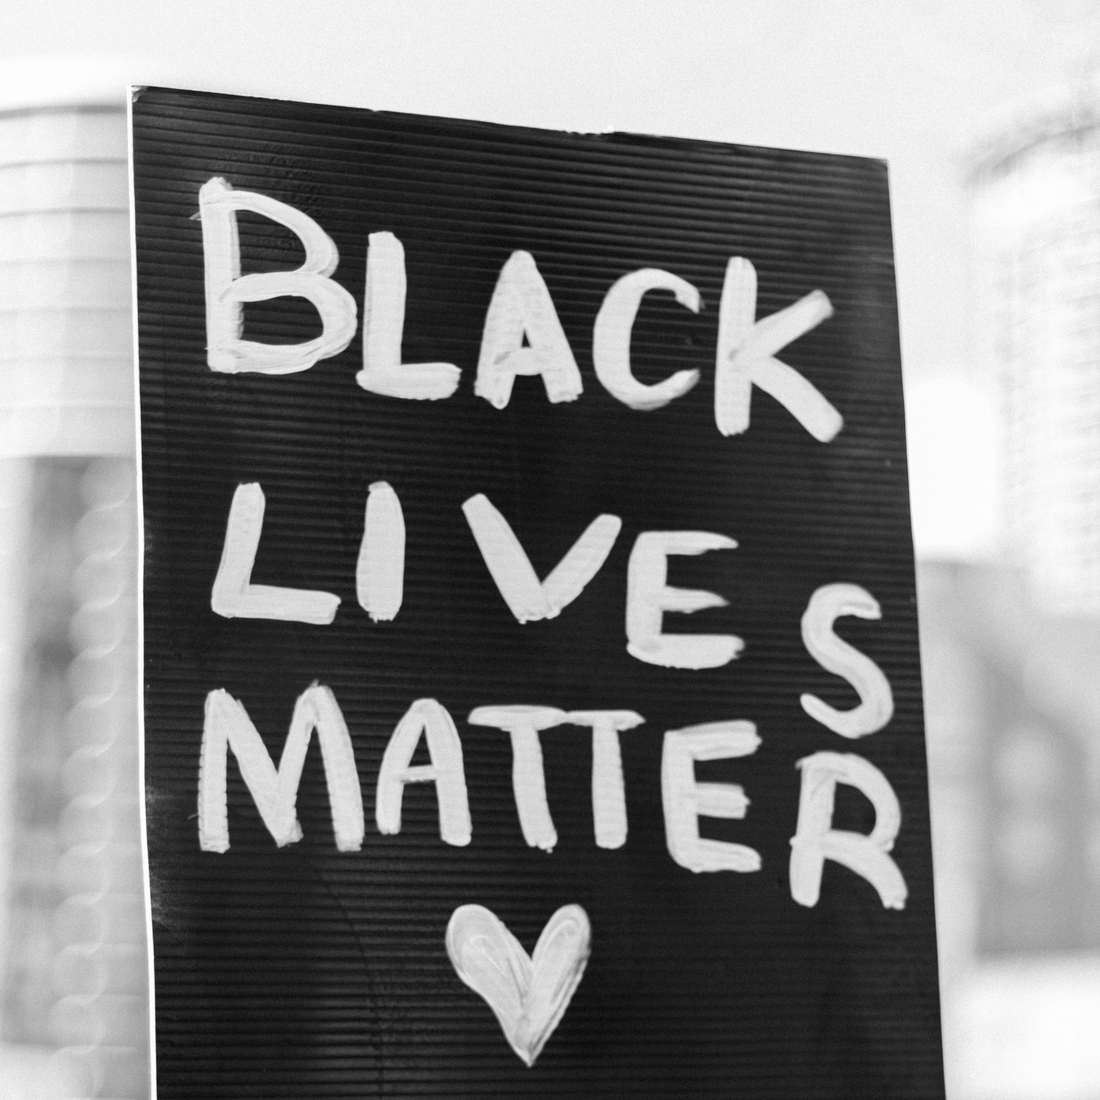 Our Commitment to Black Lives Matter